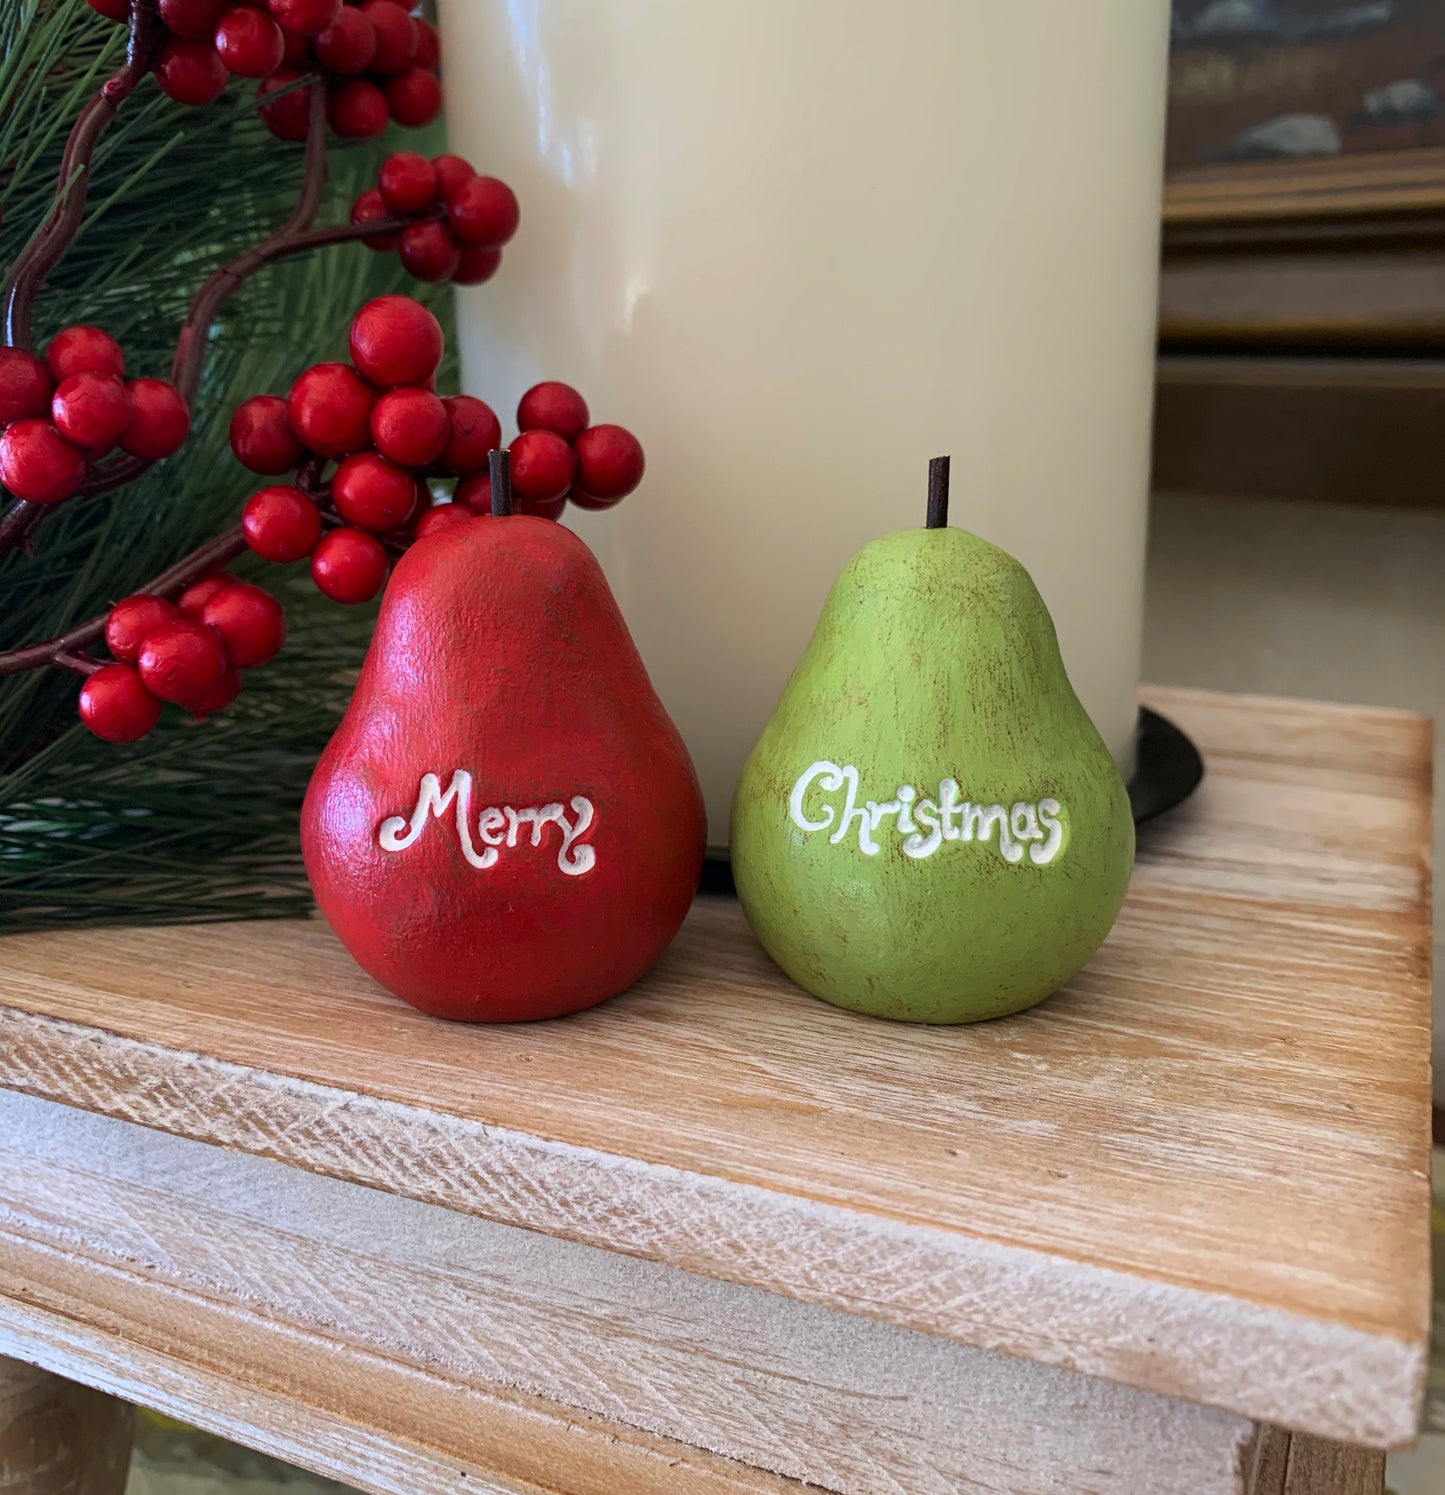 2 vintage style red and green Merry Christmas pears